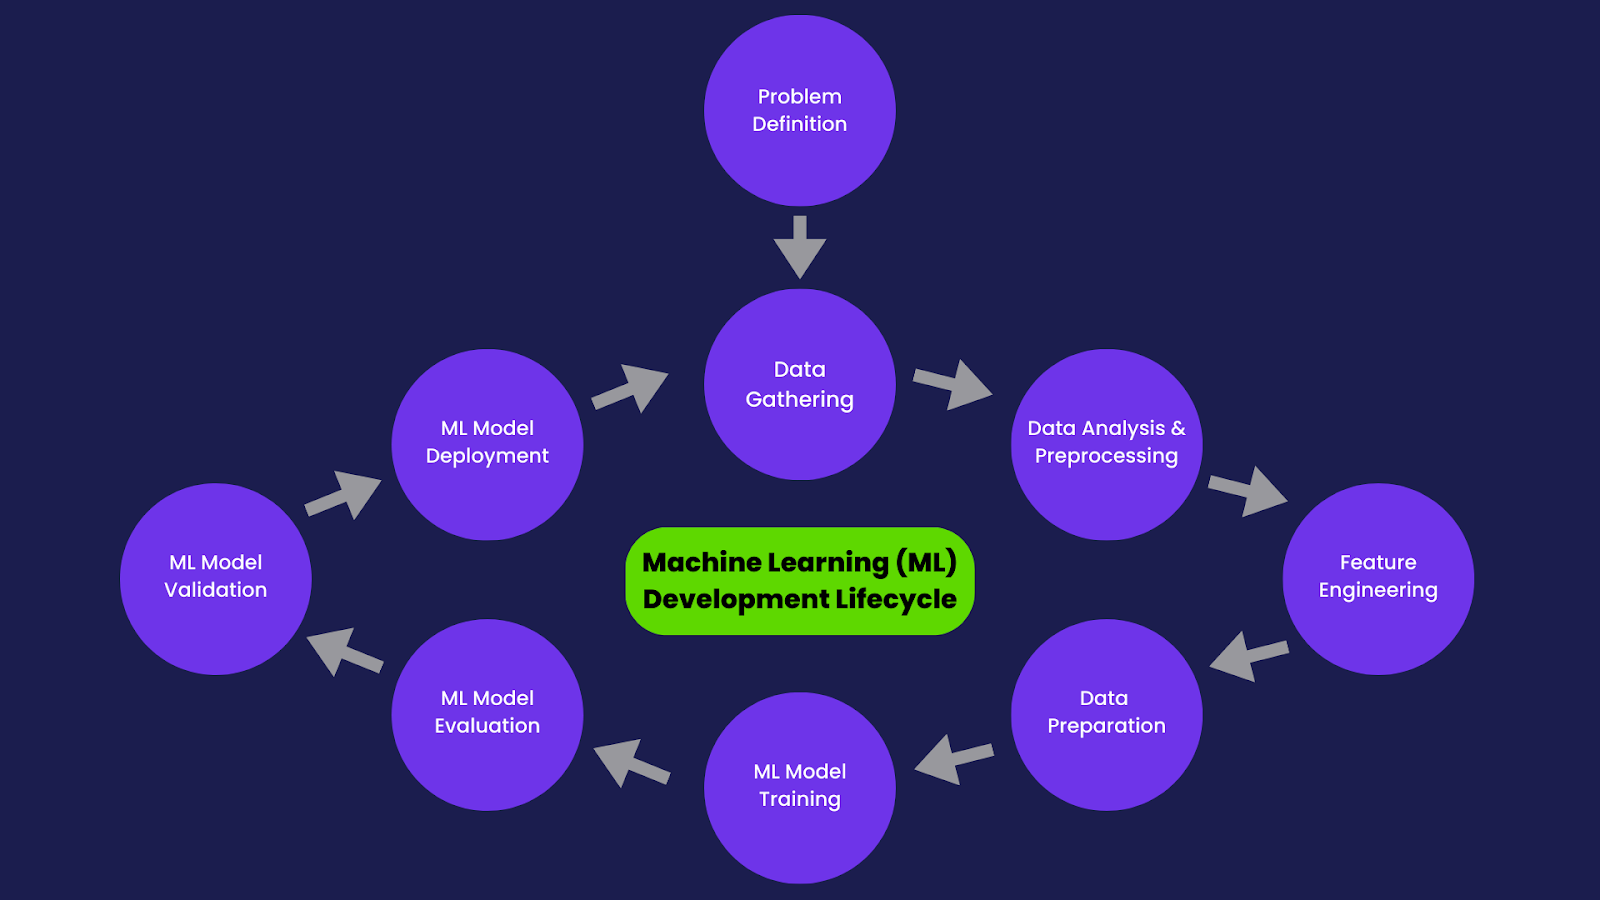 A representation of the cyclical Machine Learning Development Lifecycle